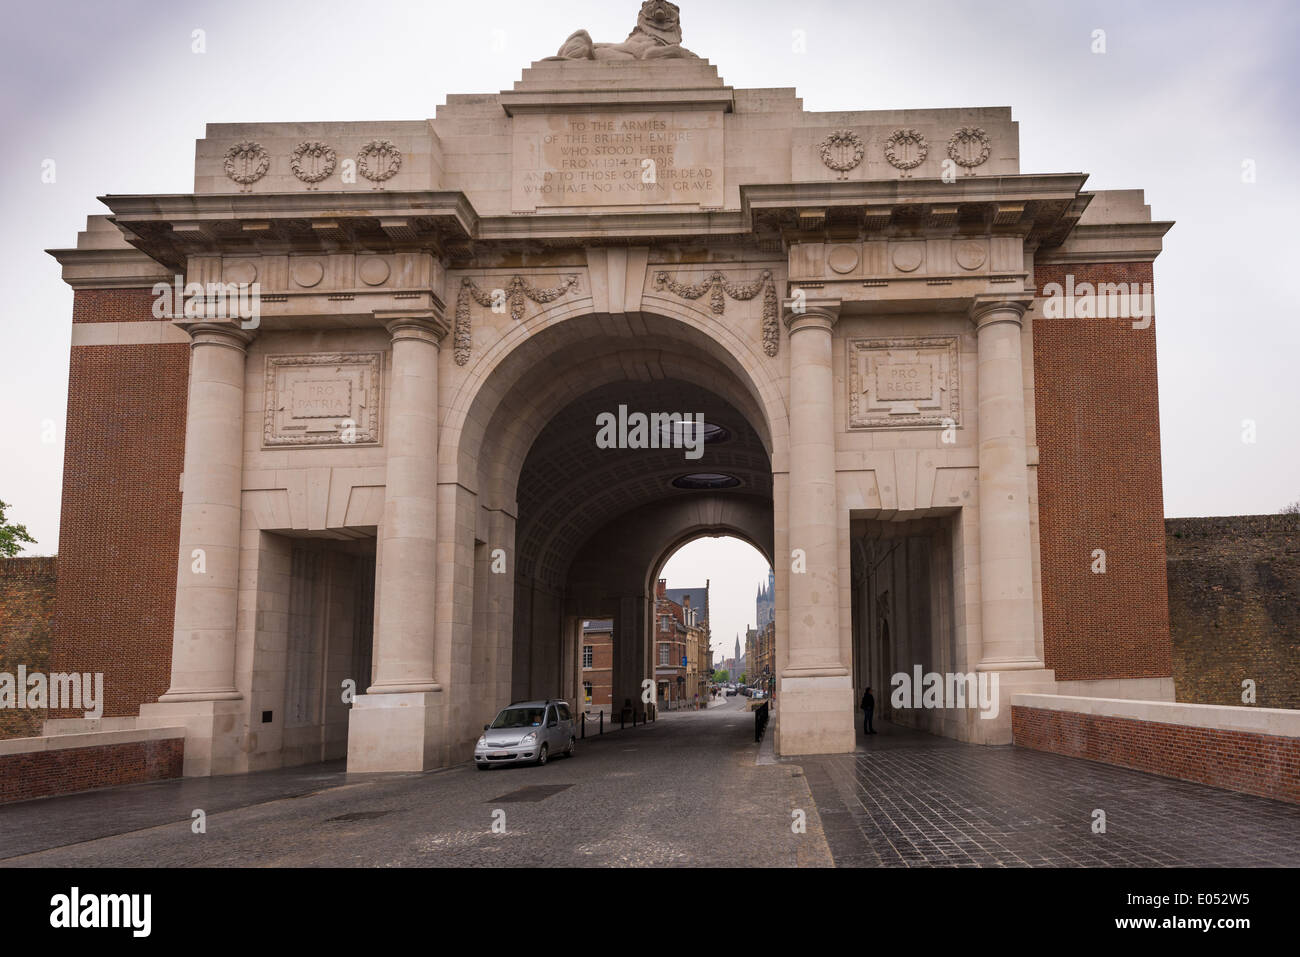 The Menin Gate memorial, Ypres, recording the names of soldiers missing in WW1 battles in the Ypres area Stock Photo